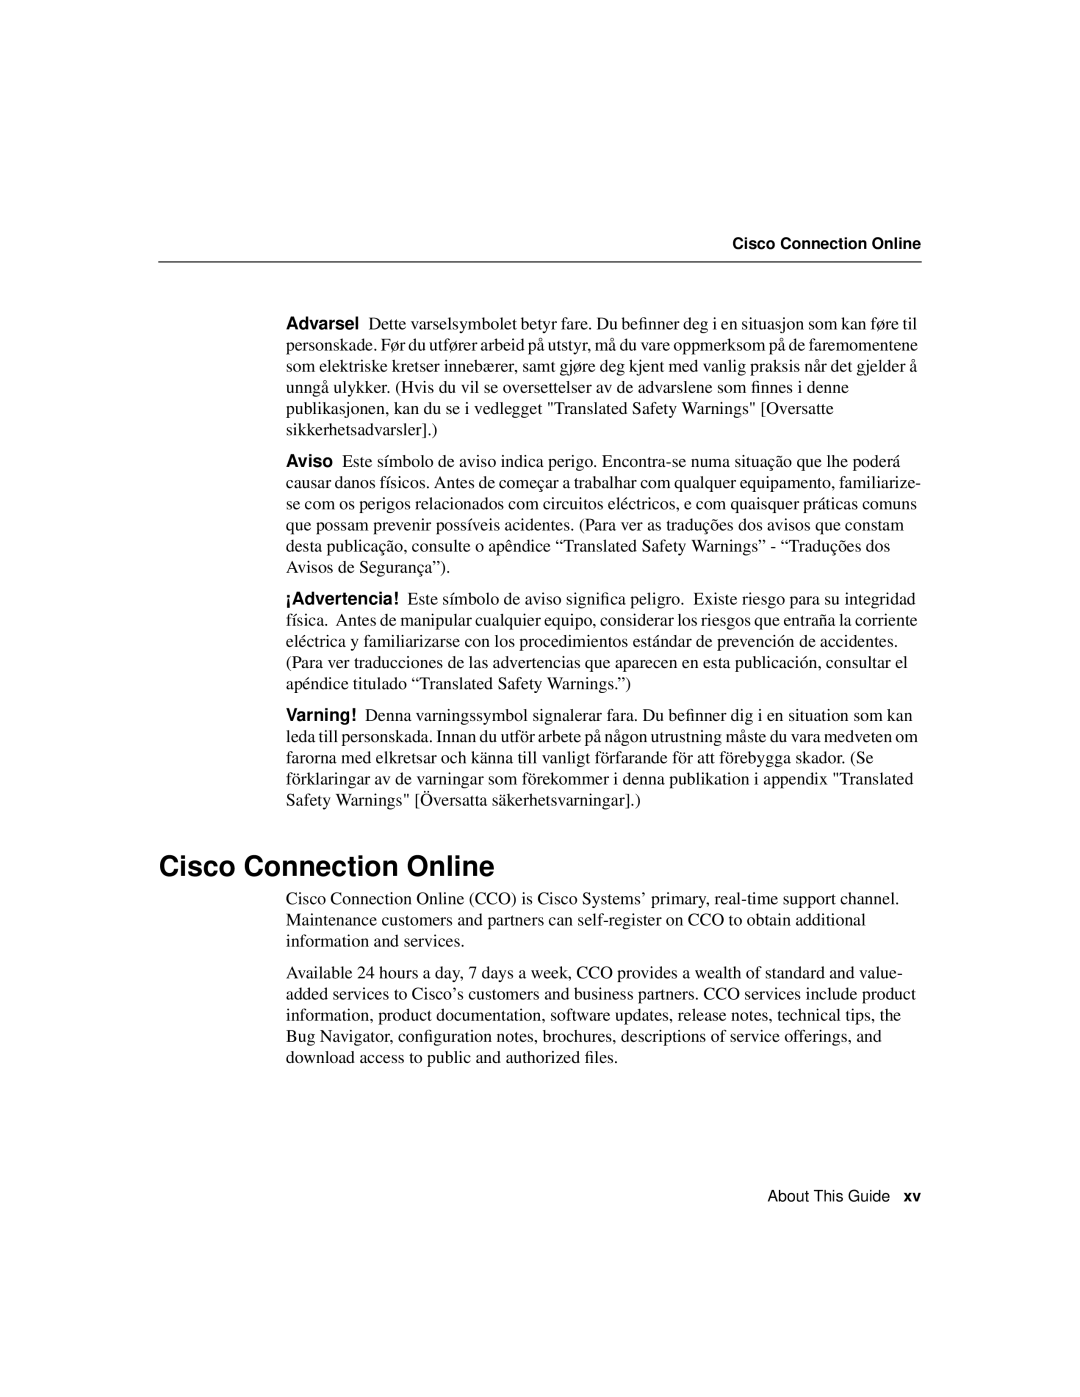 Cisco Systems Computer Accessories manual Cisco Connection Online 